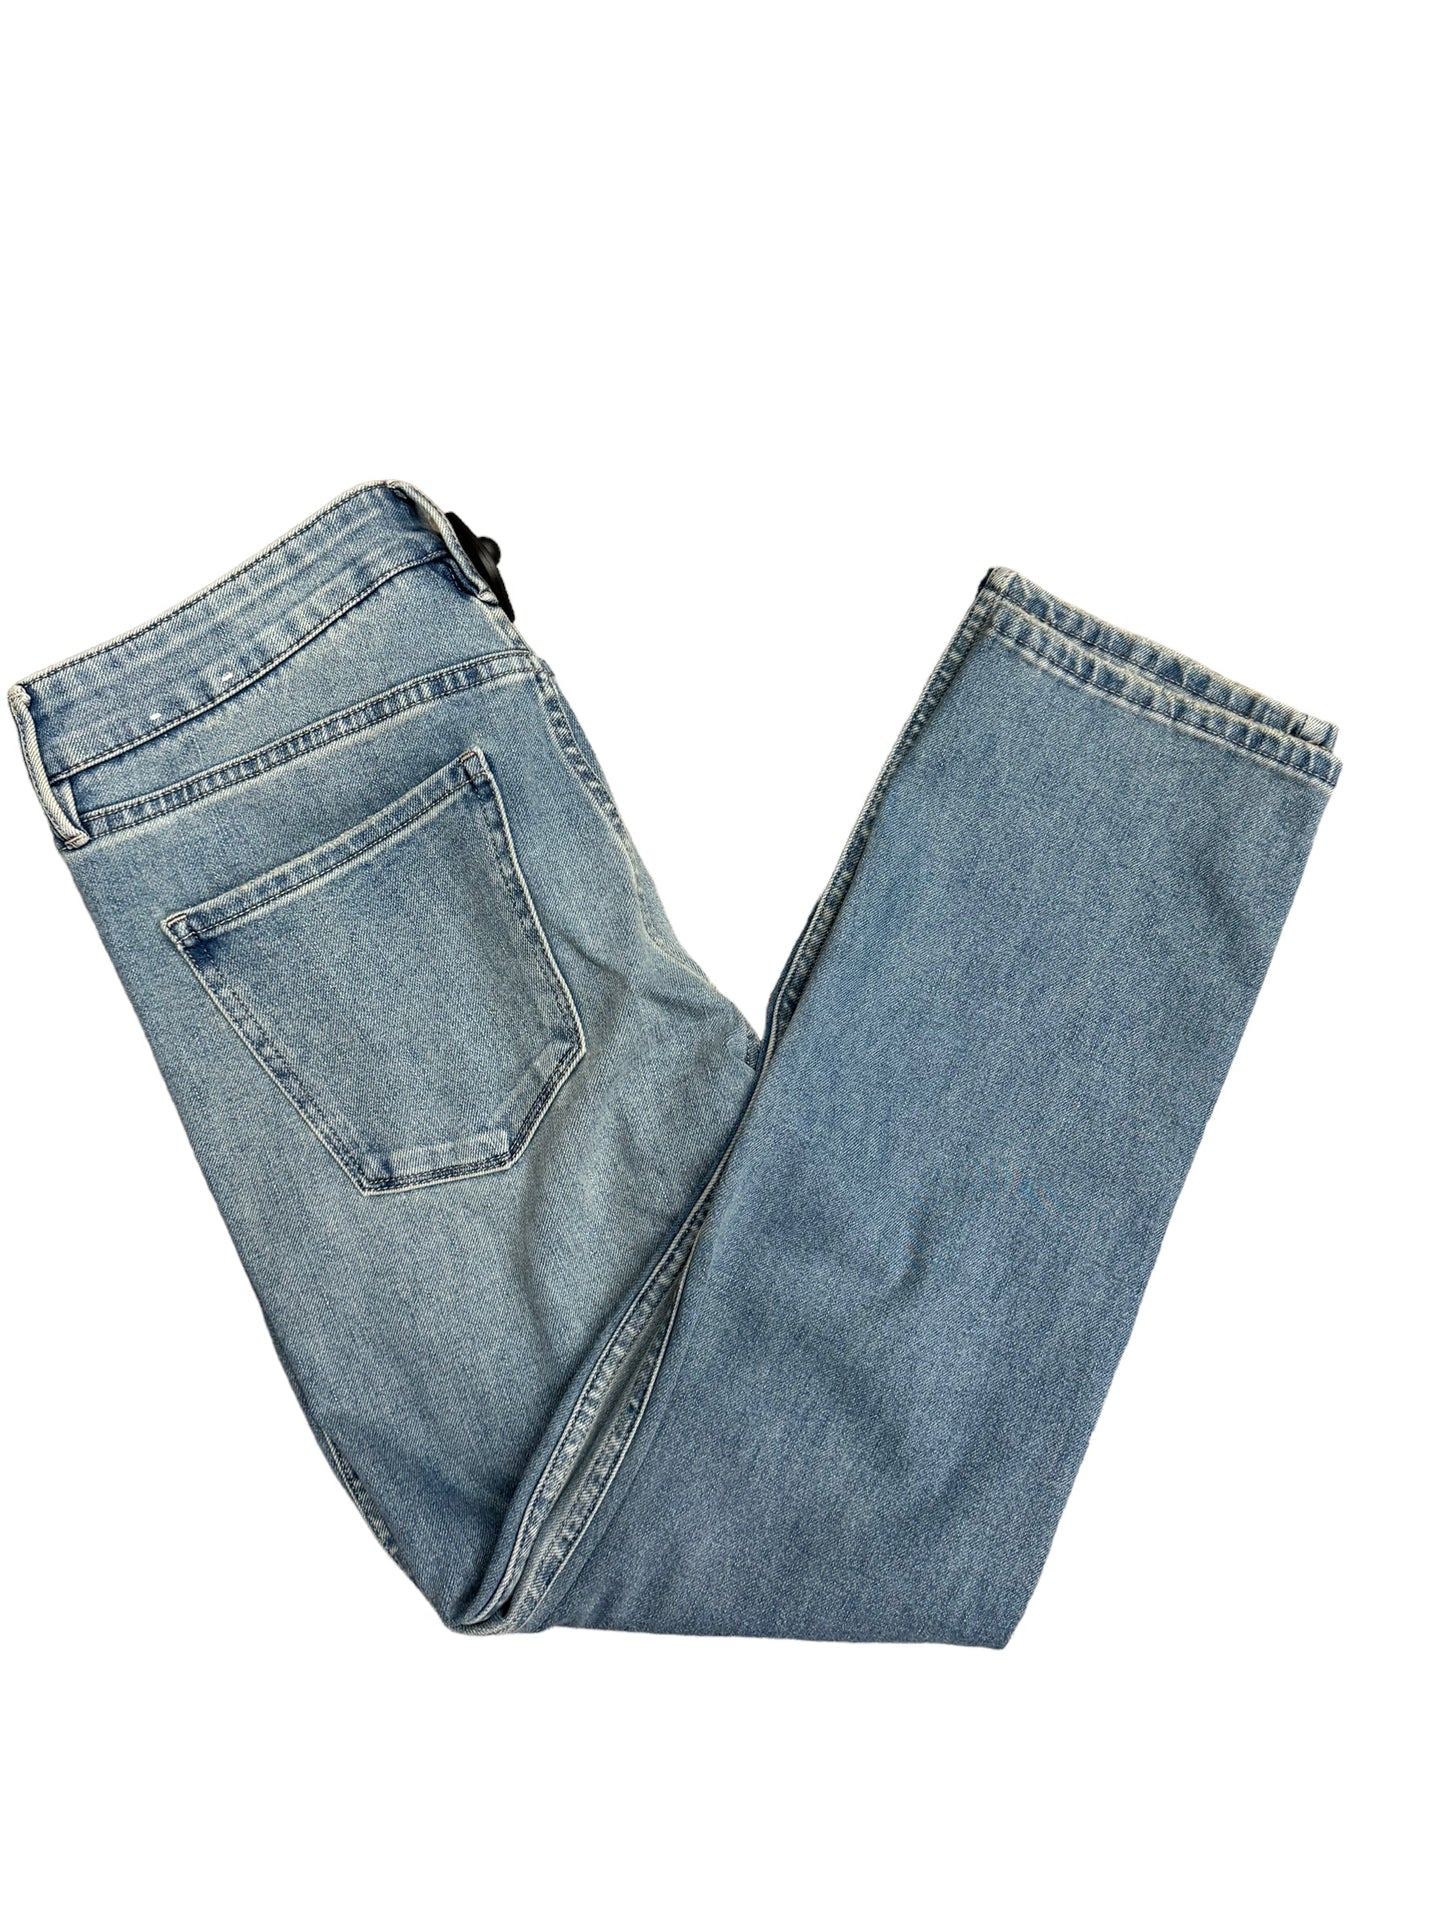 Jeans Straight By White House Black Market  Size: 8